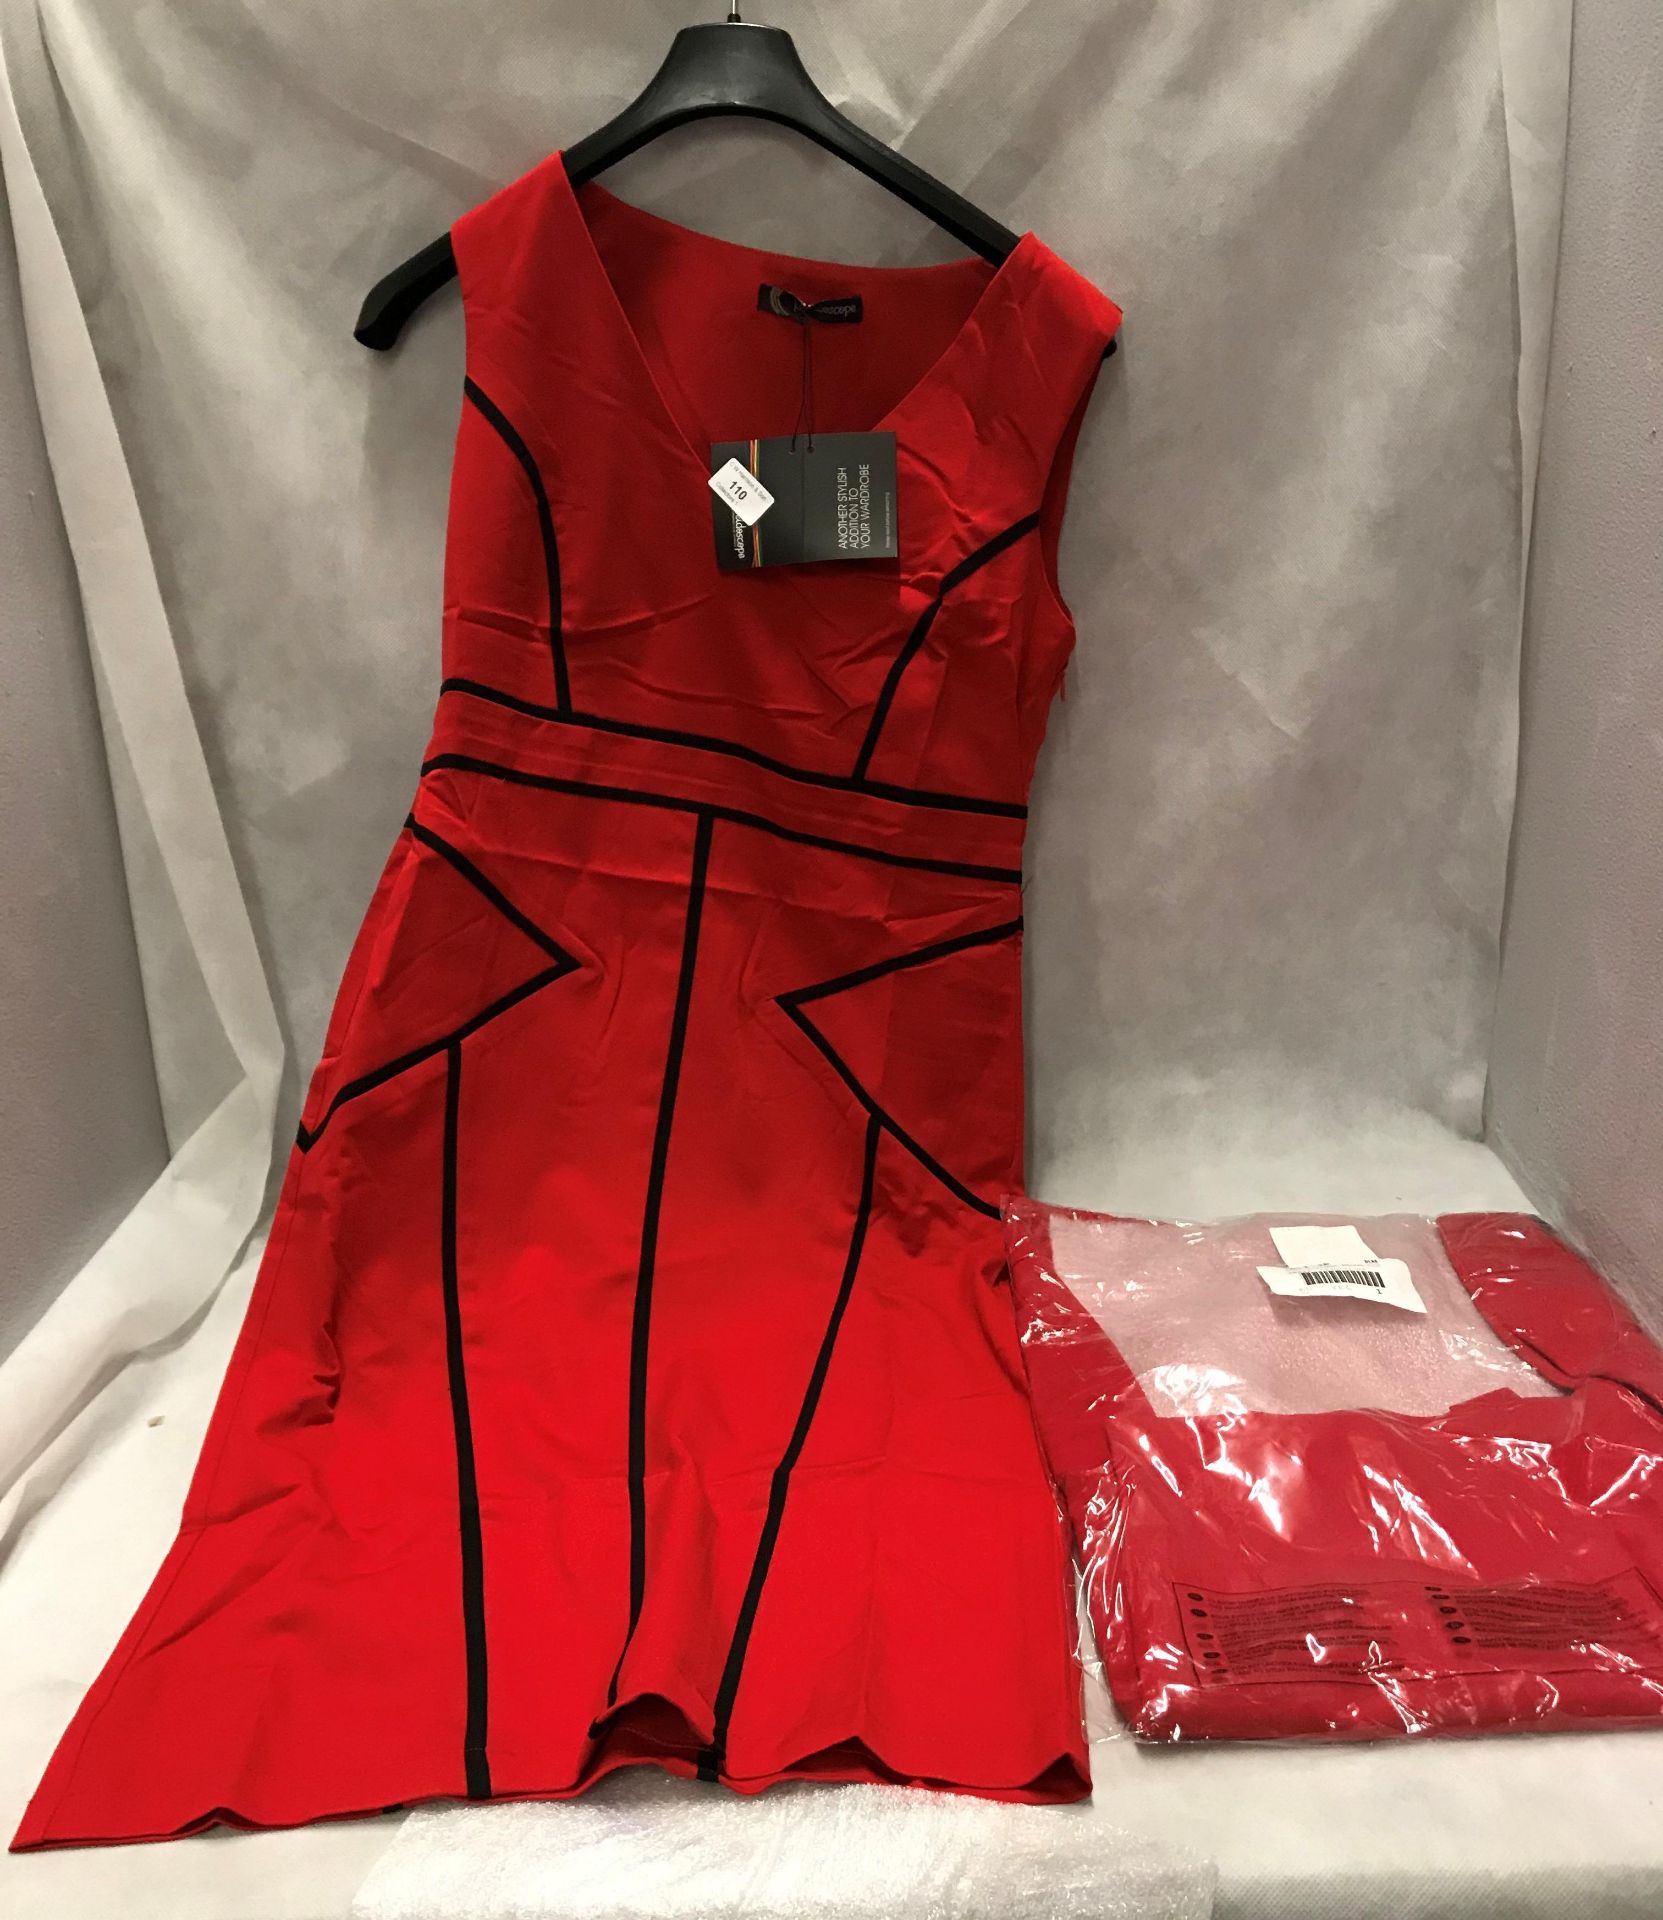 2 x assorted style ladies sleeveless dresses in red by Kaleidescope, etc.